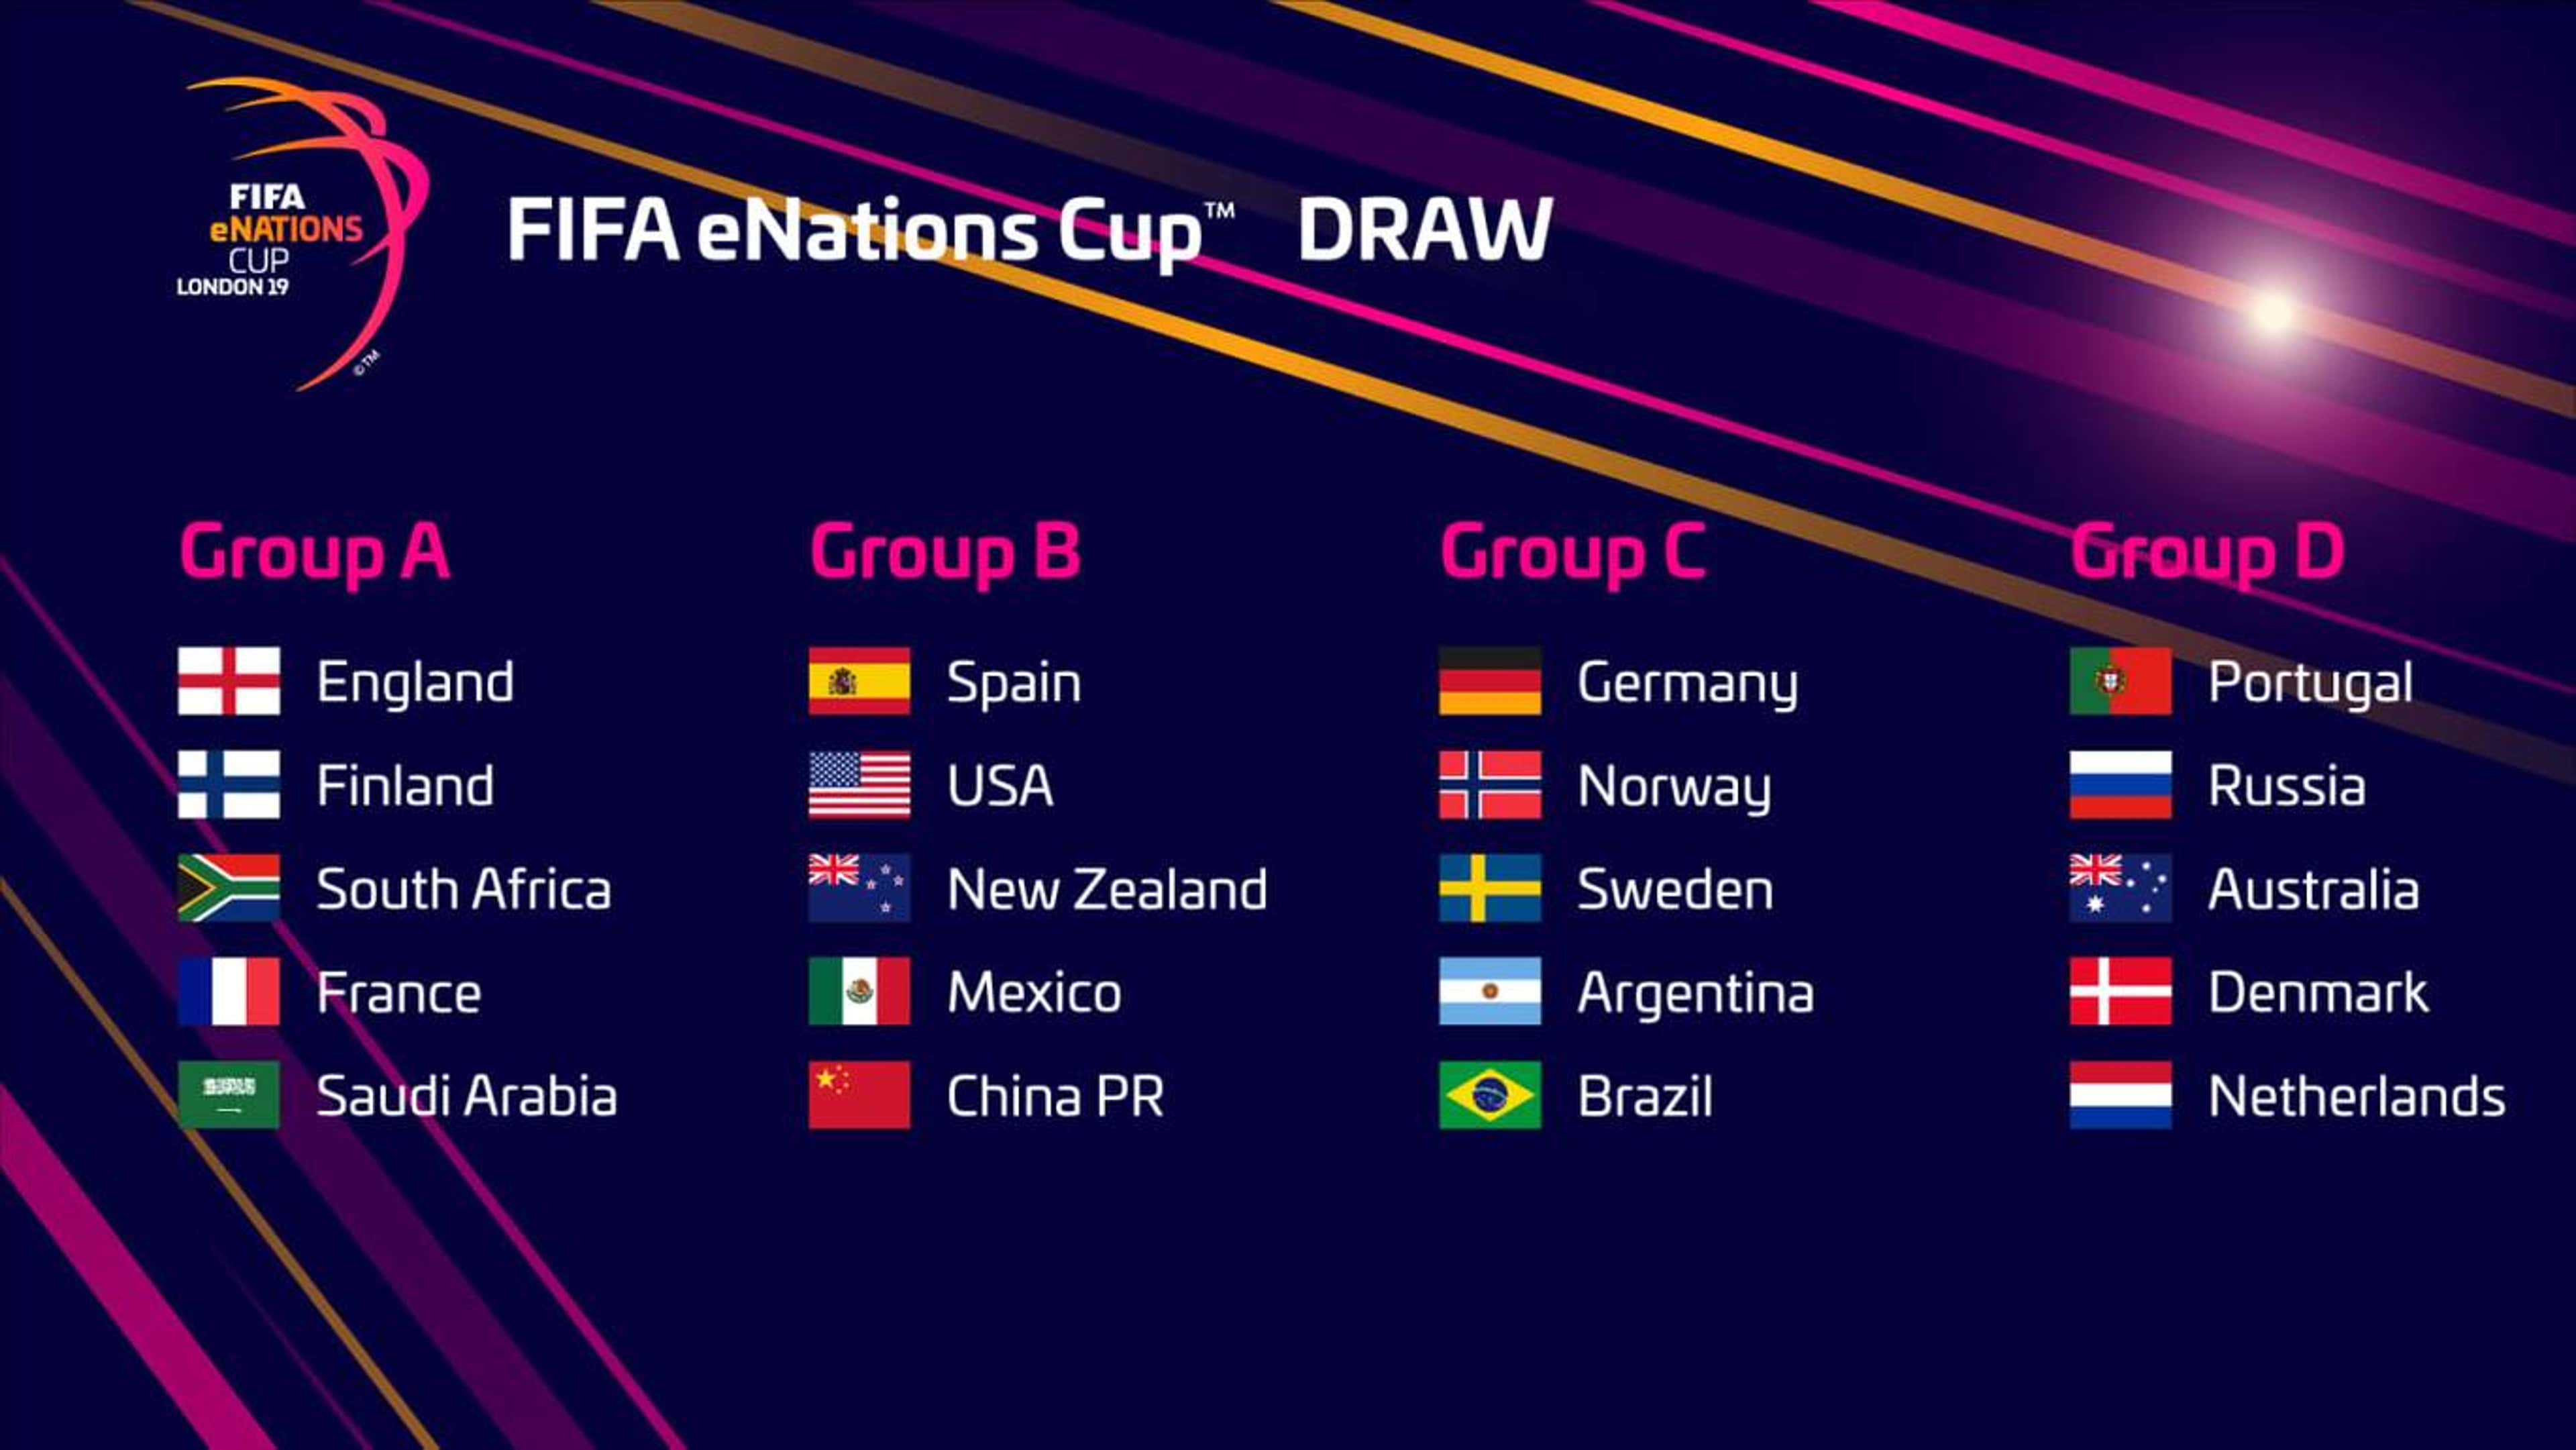 FIFA eNations Cup Groups